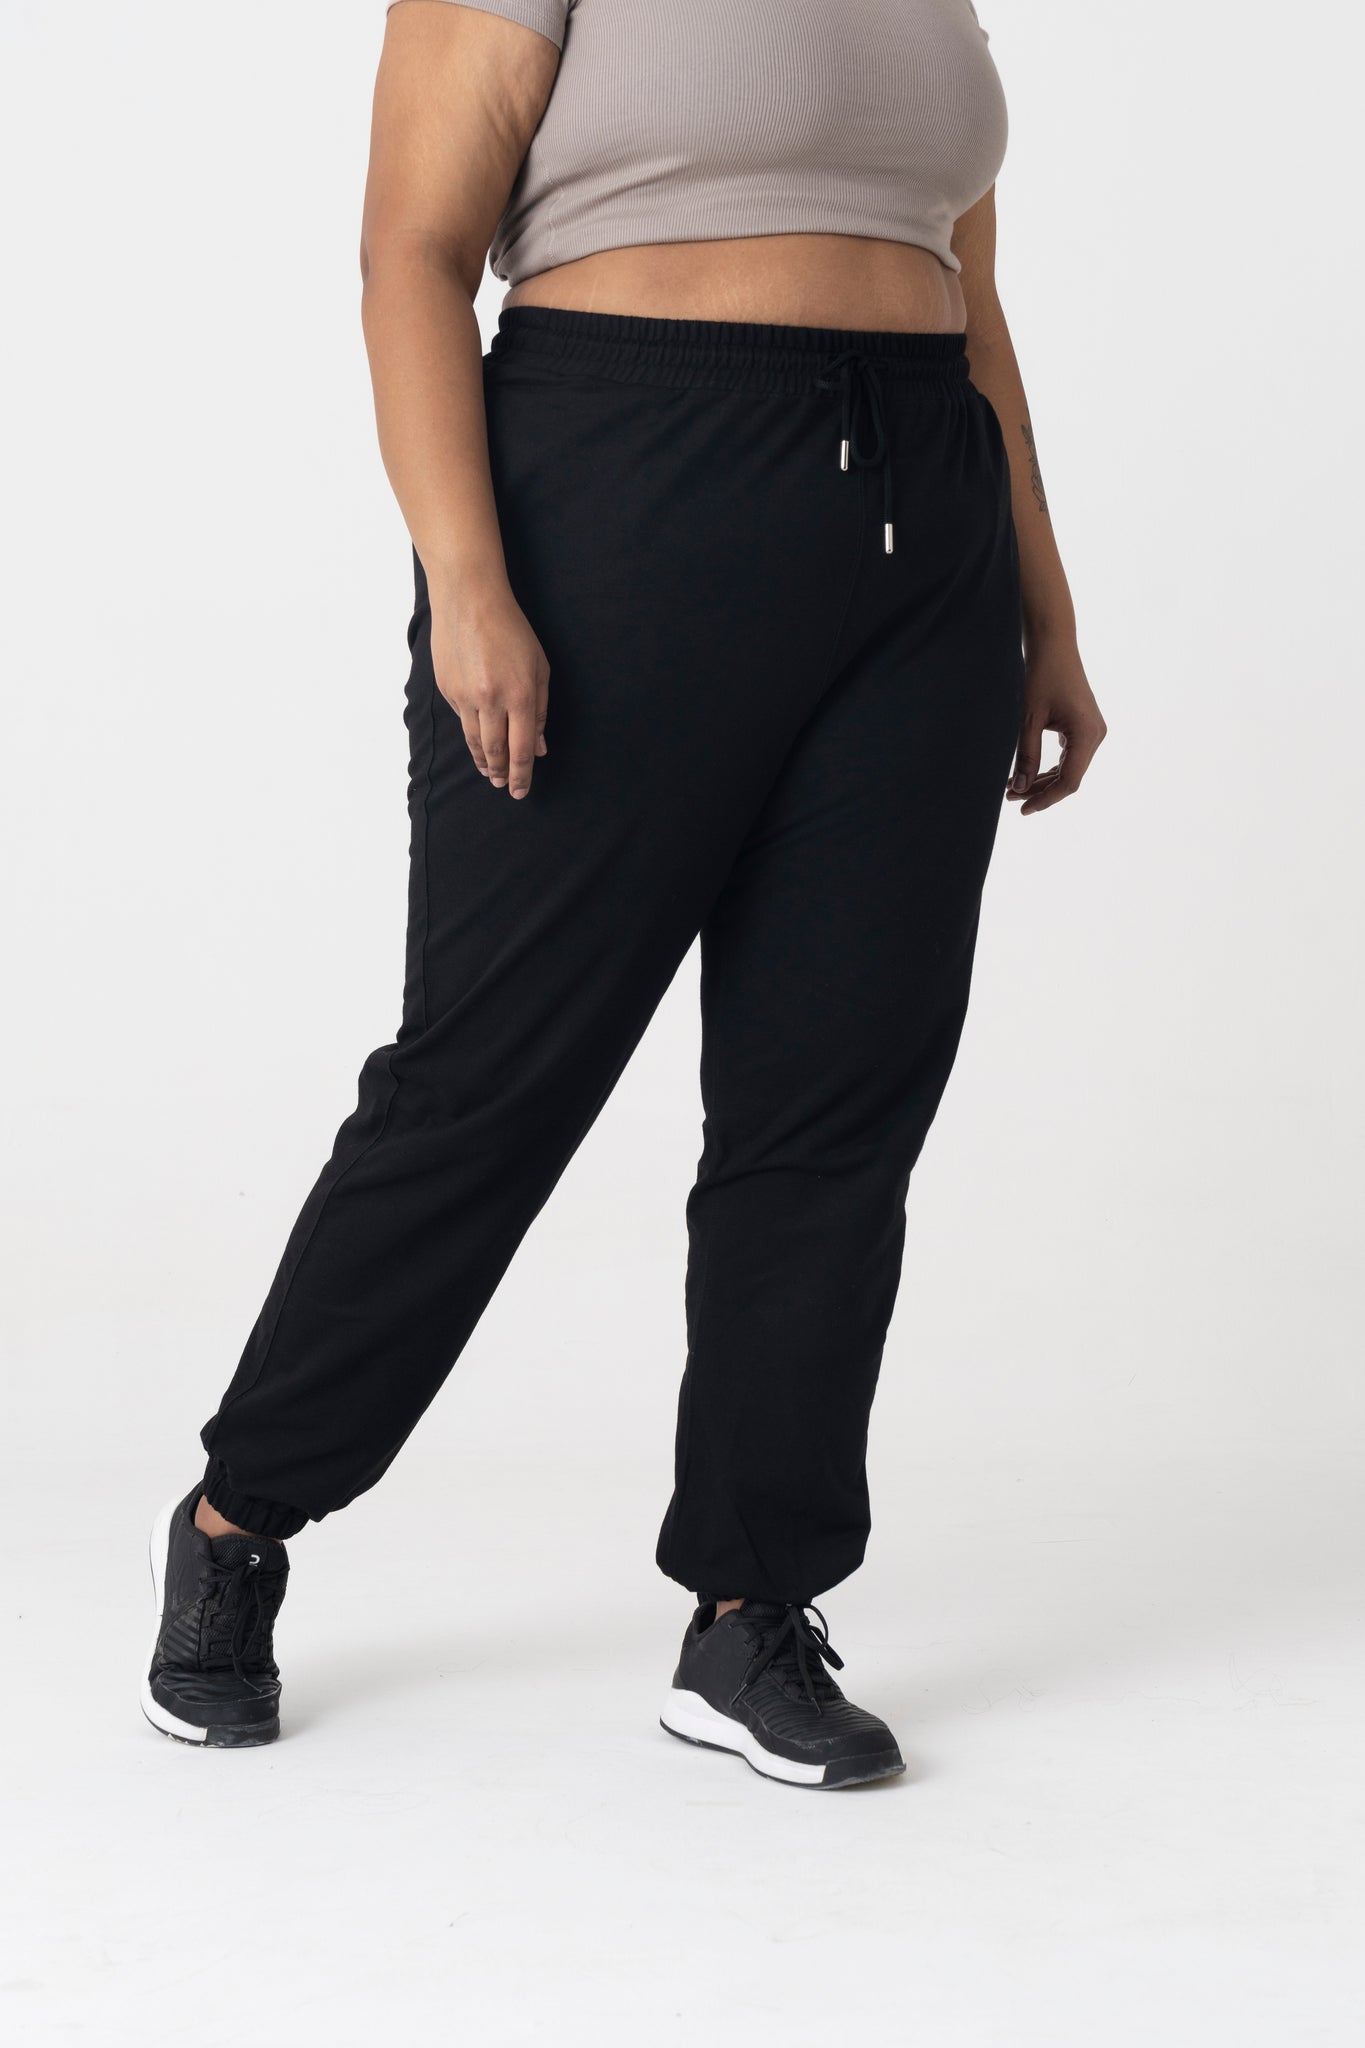 All-Day Jogger: Black